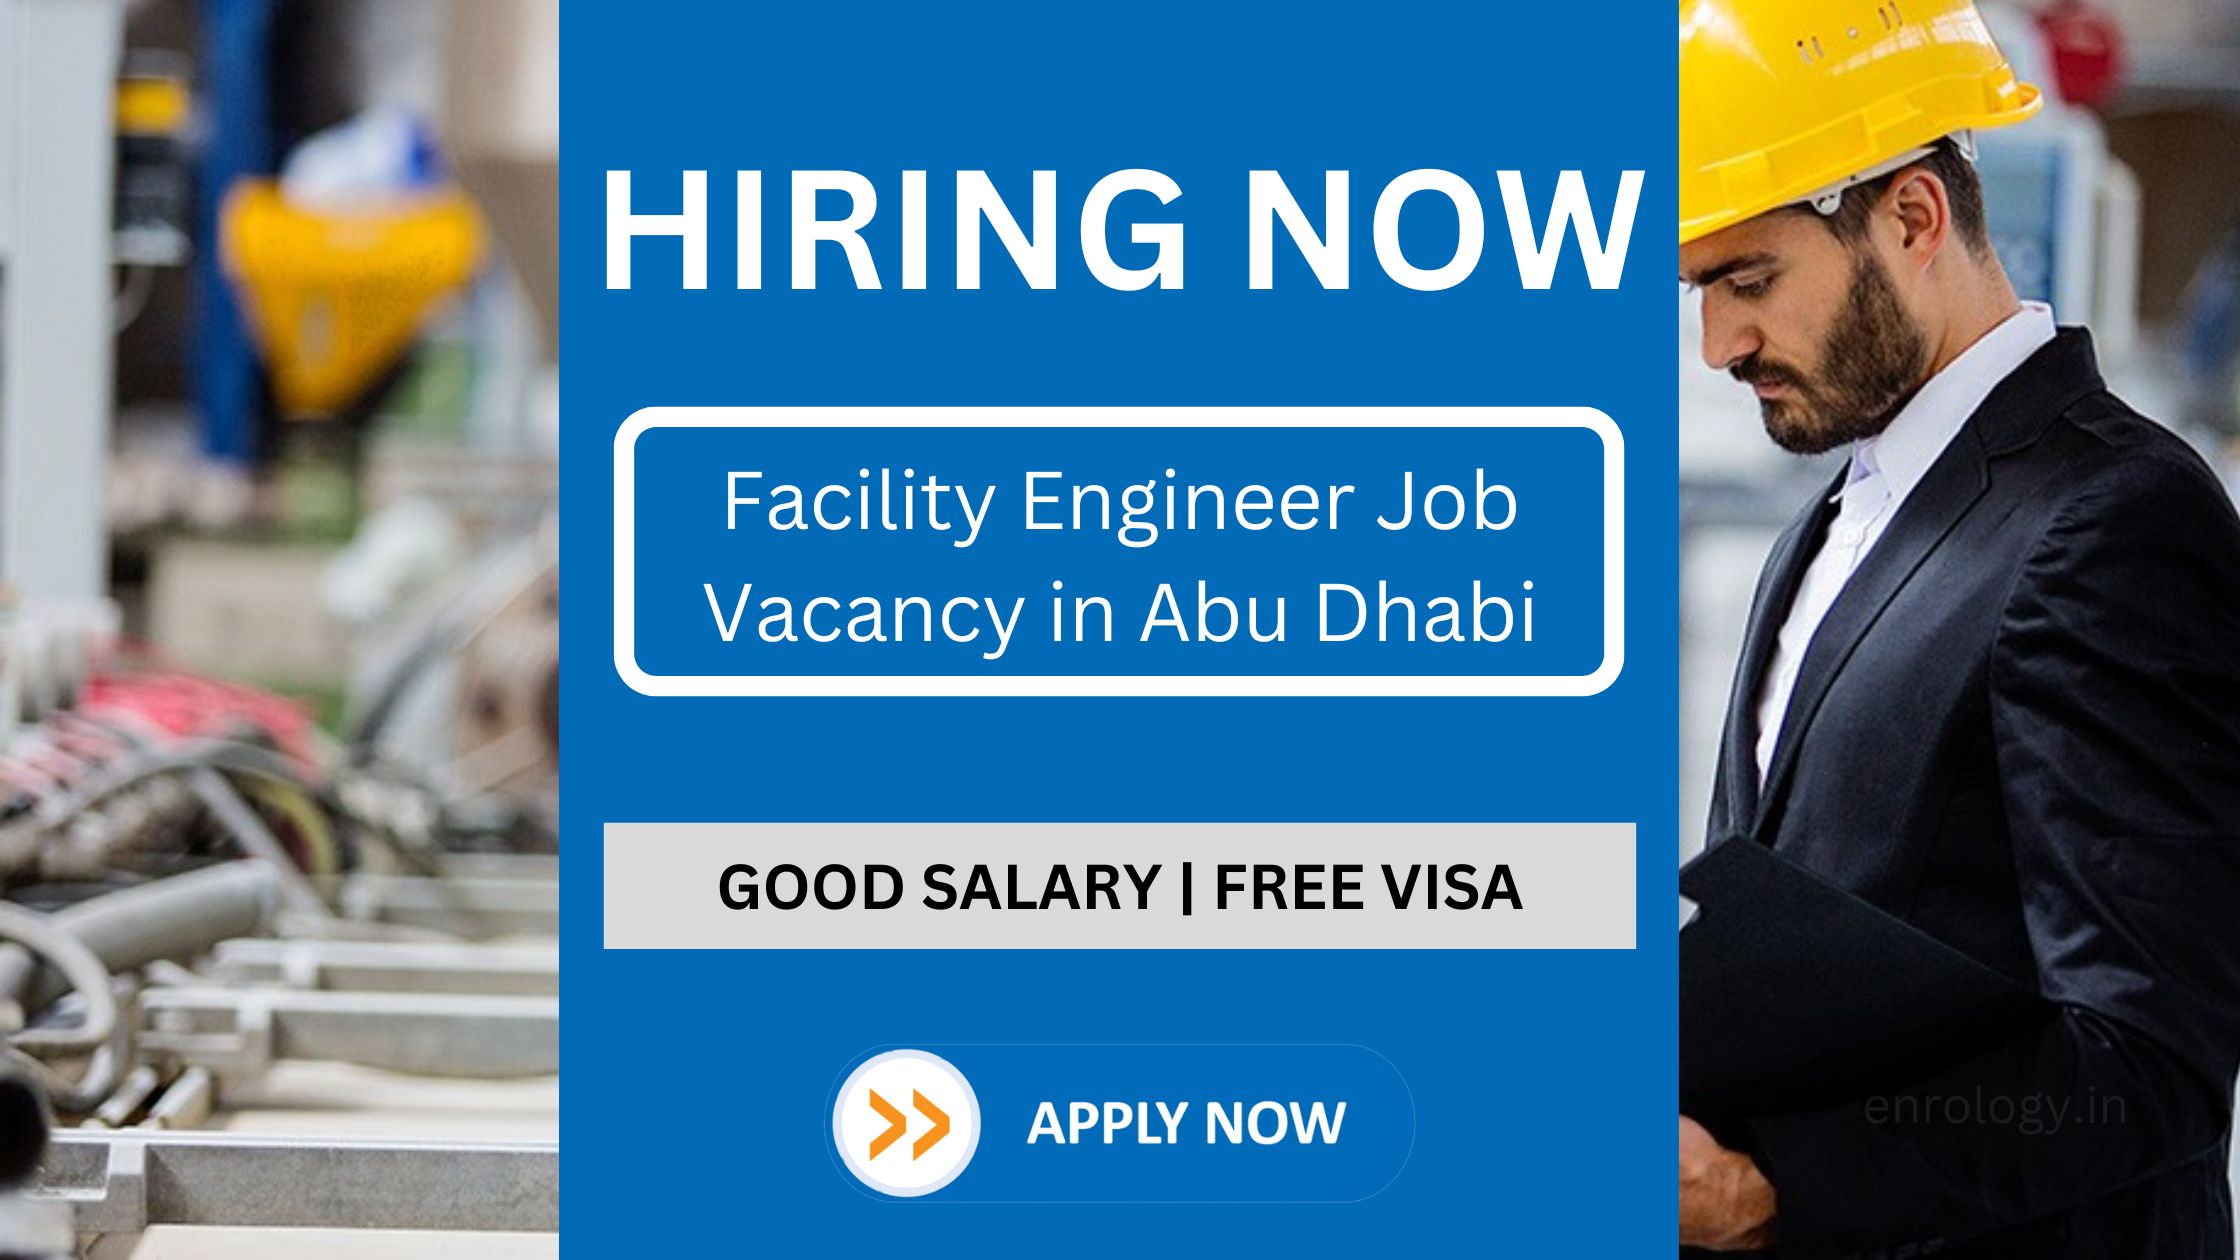 Need Facility Engineer - Requirement: Good Technical Knowledge